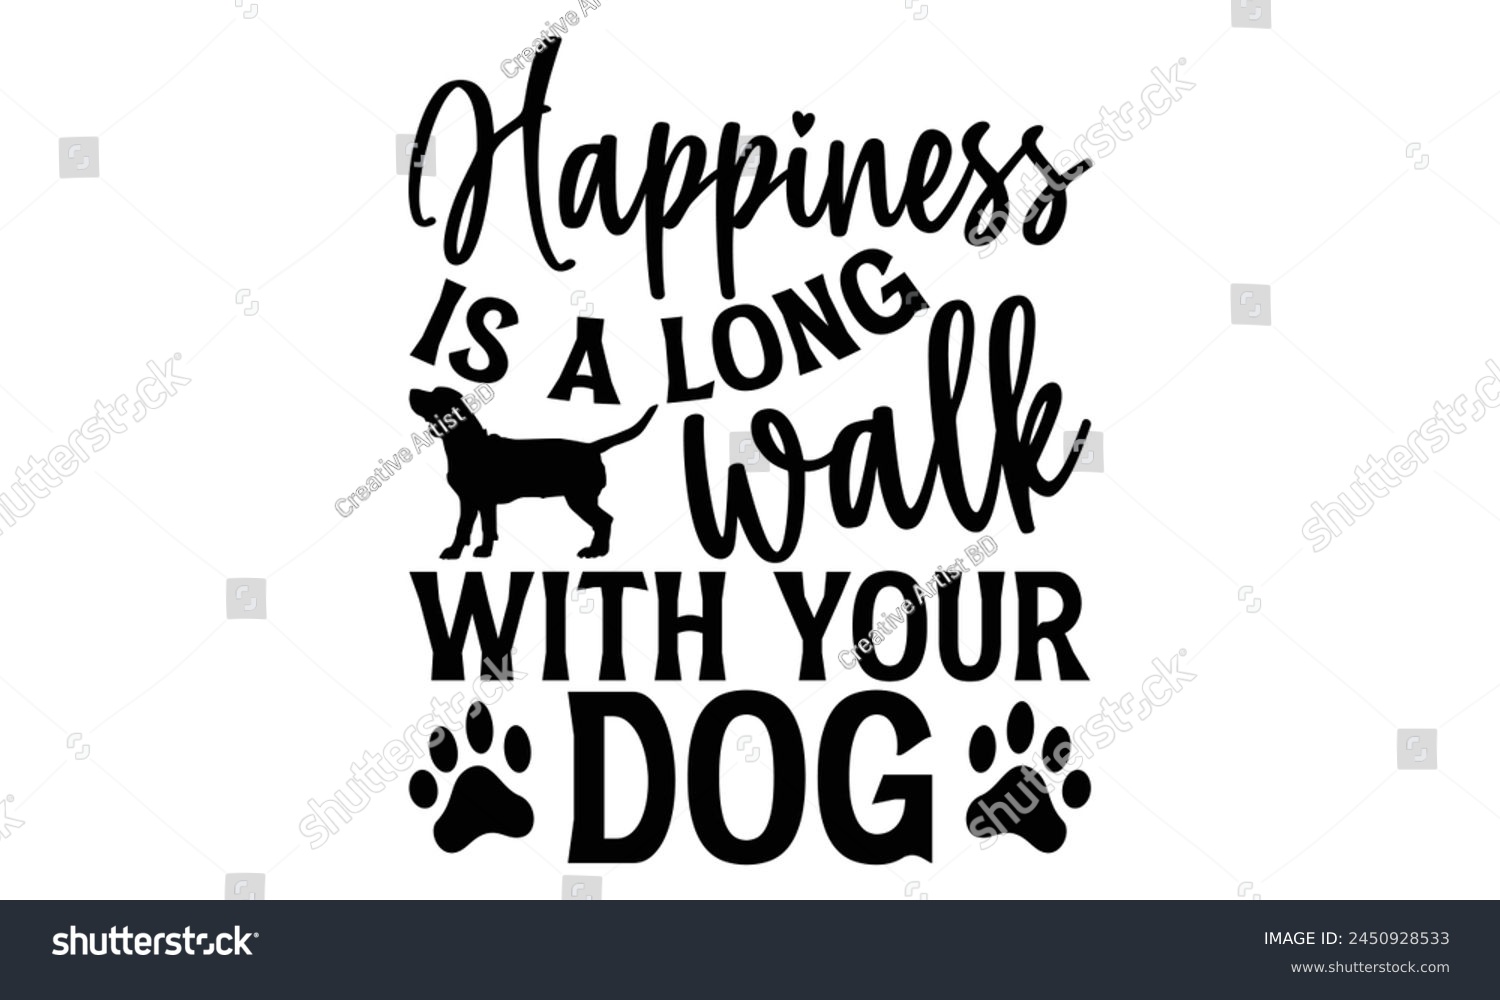 SVG of Happiness Is A Long Walk With Your Dog - Dog T shirt Design, Handmade calligraphy vector illustration, Cutting and Silhouette, for prints on bags, cups, card, posters. svg